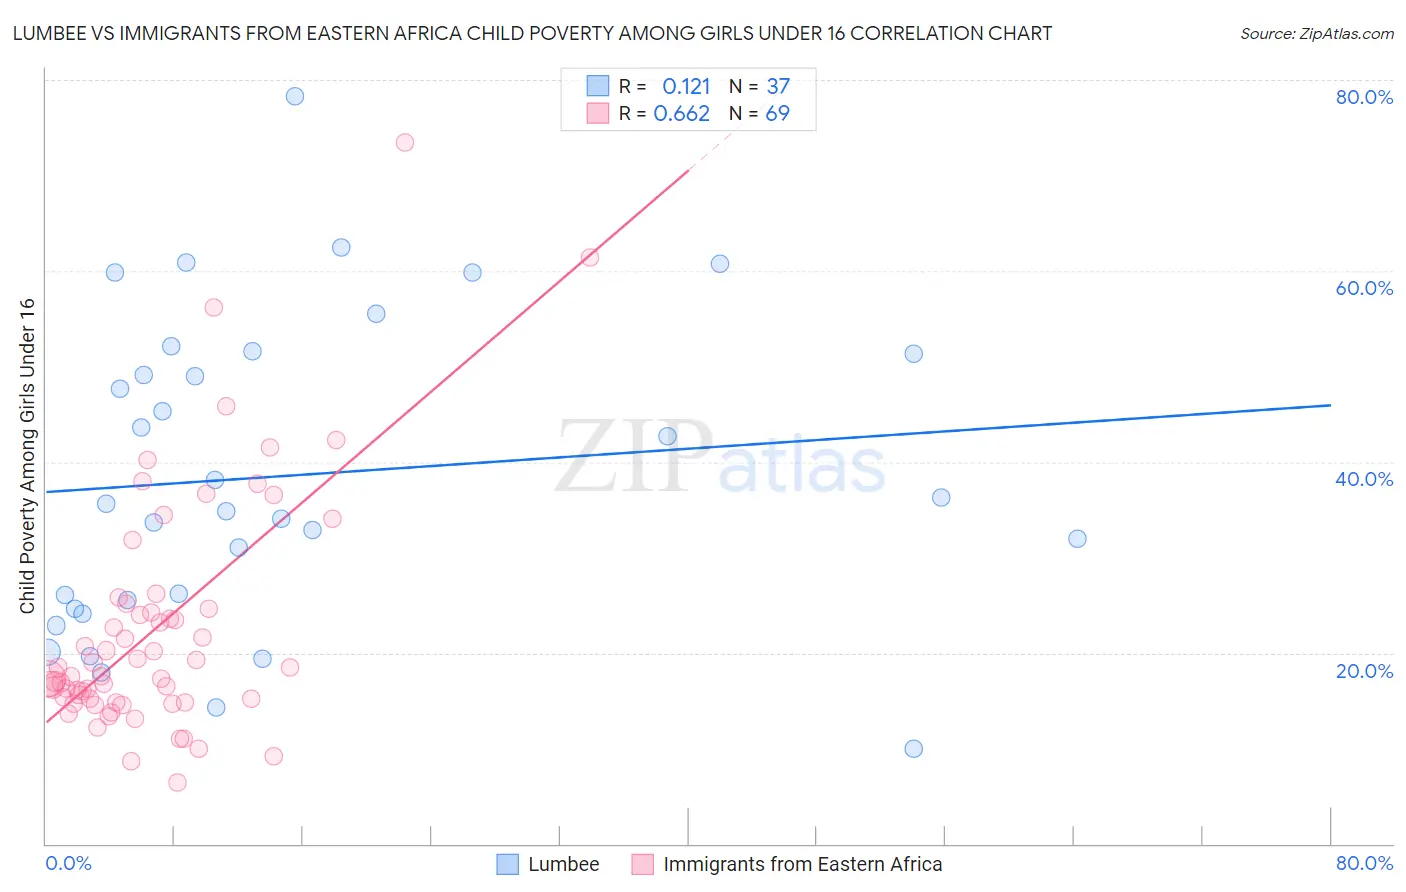 Lumbee vs Immigrants from Eastern Africa Child Poverty Among Girls Under 16